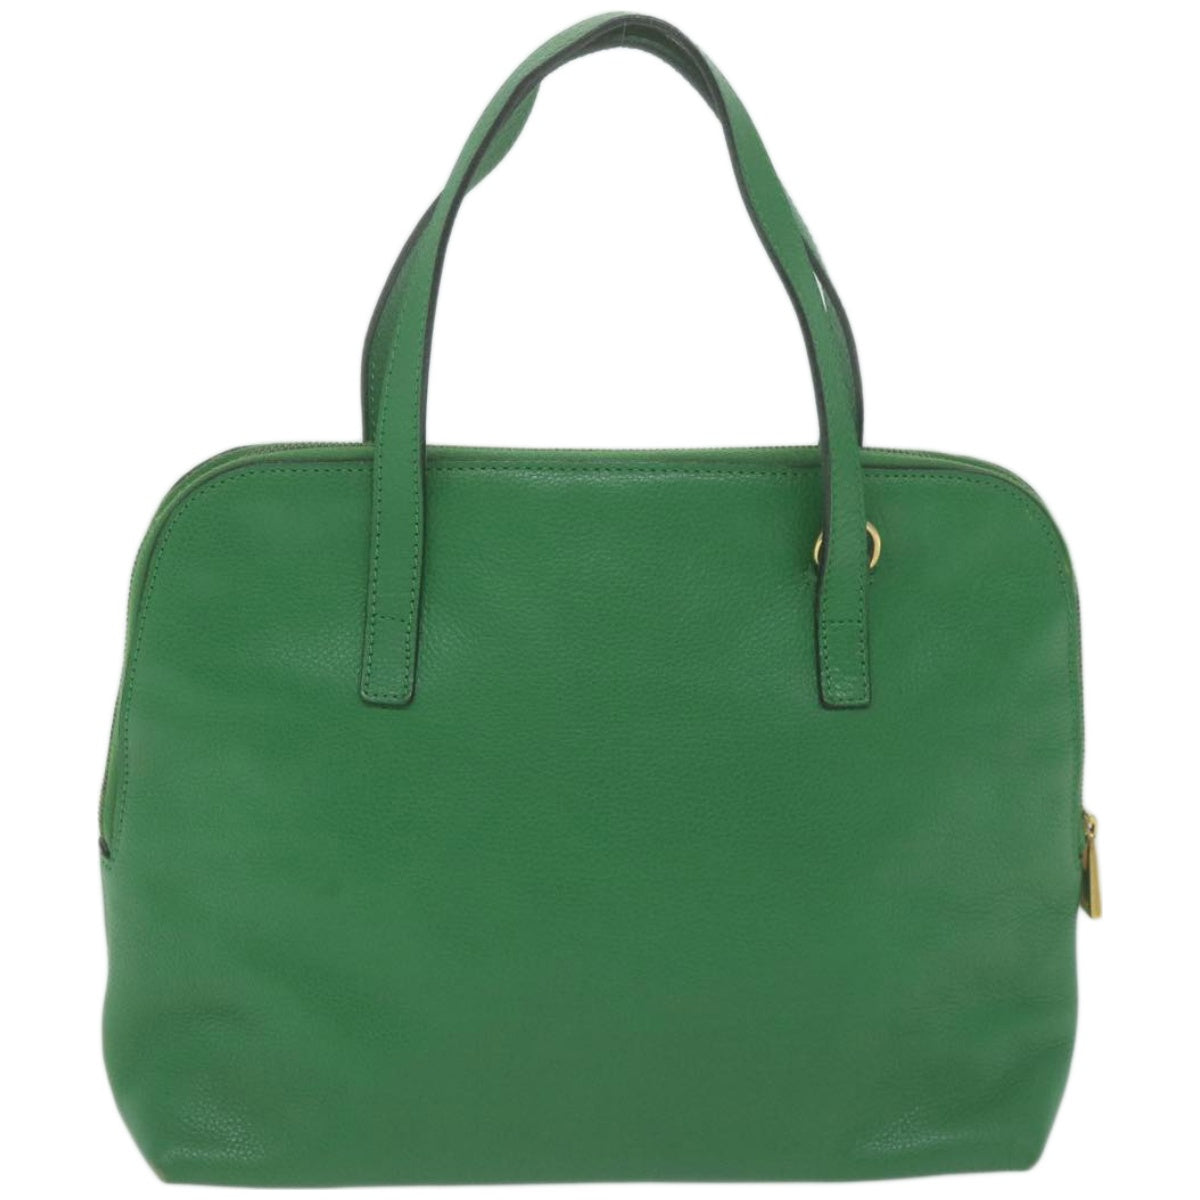 CELINE Hand Bag Leather 2way Green Auth 66491 - 0